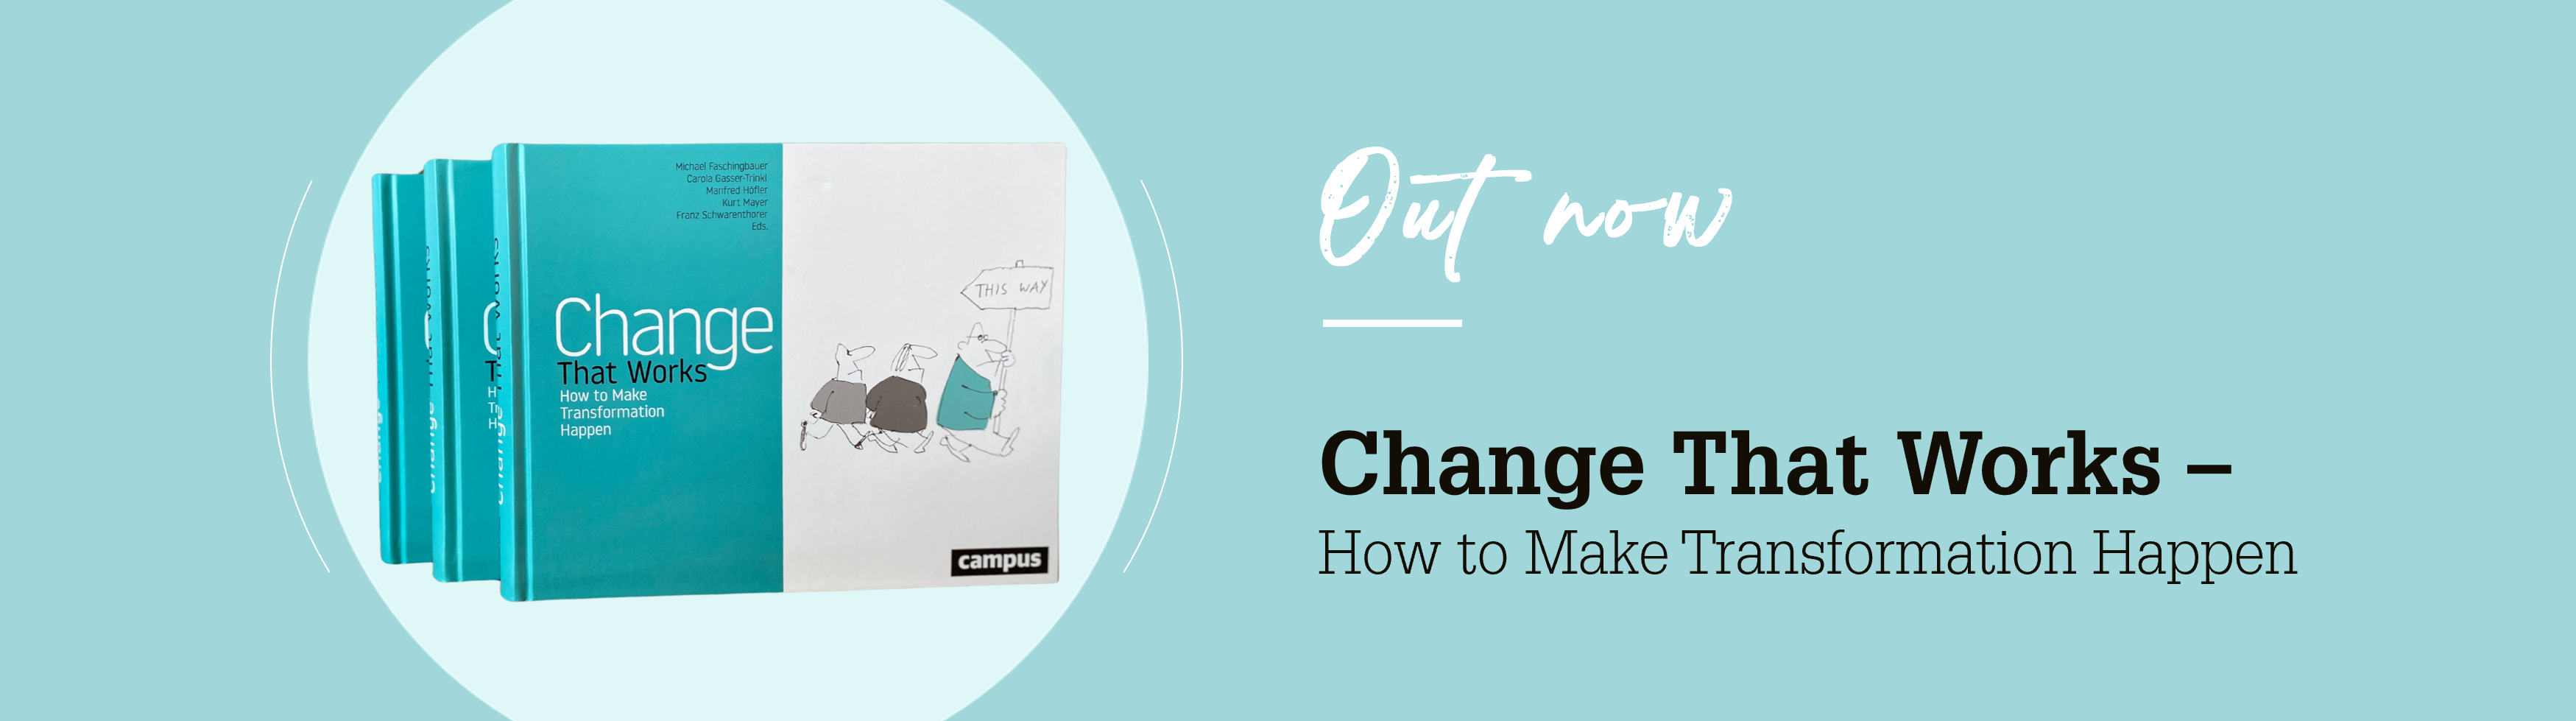 Banner Book Change That Works – Out now